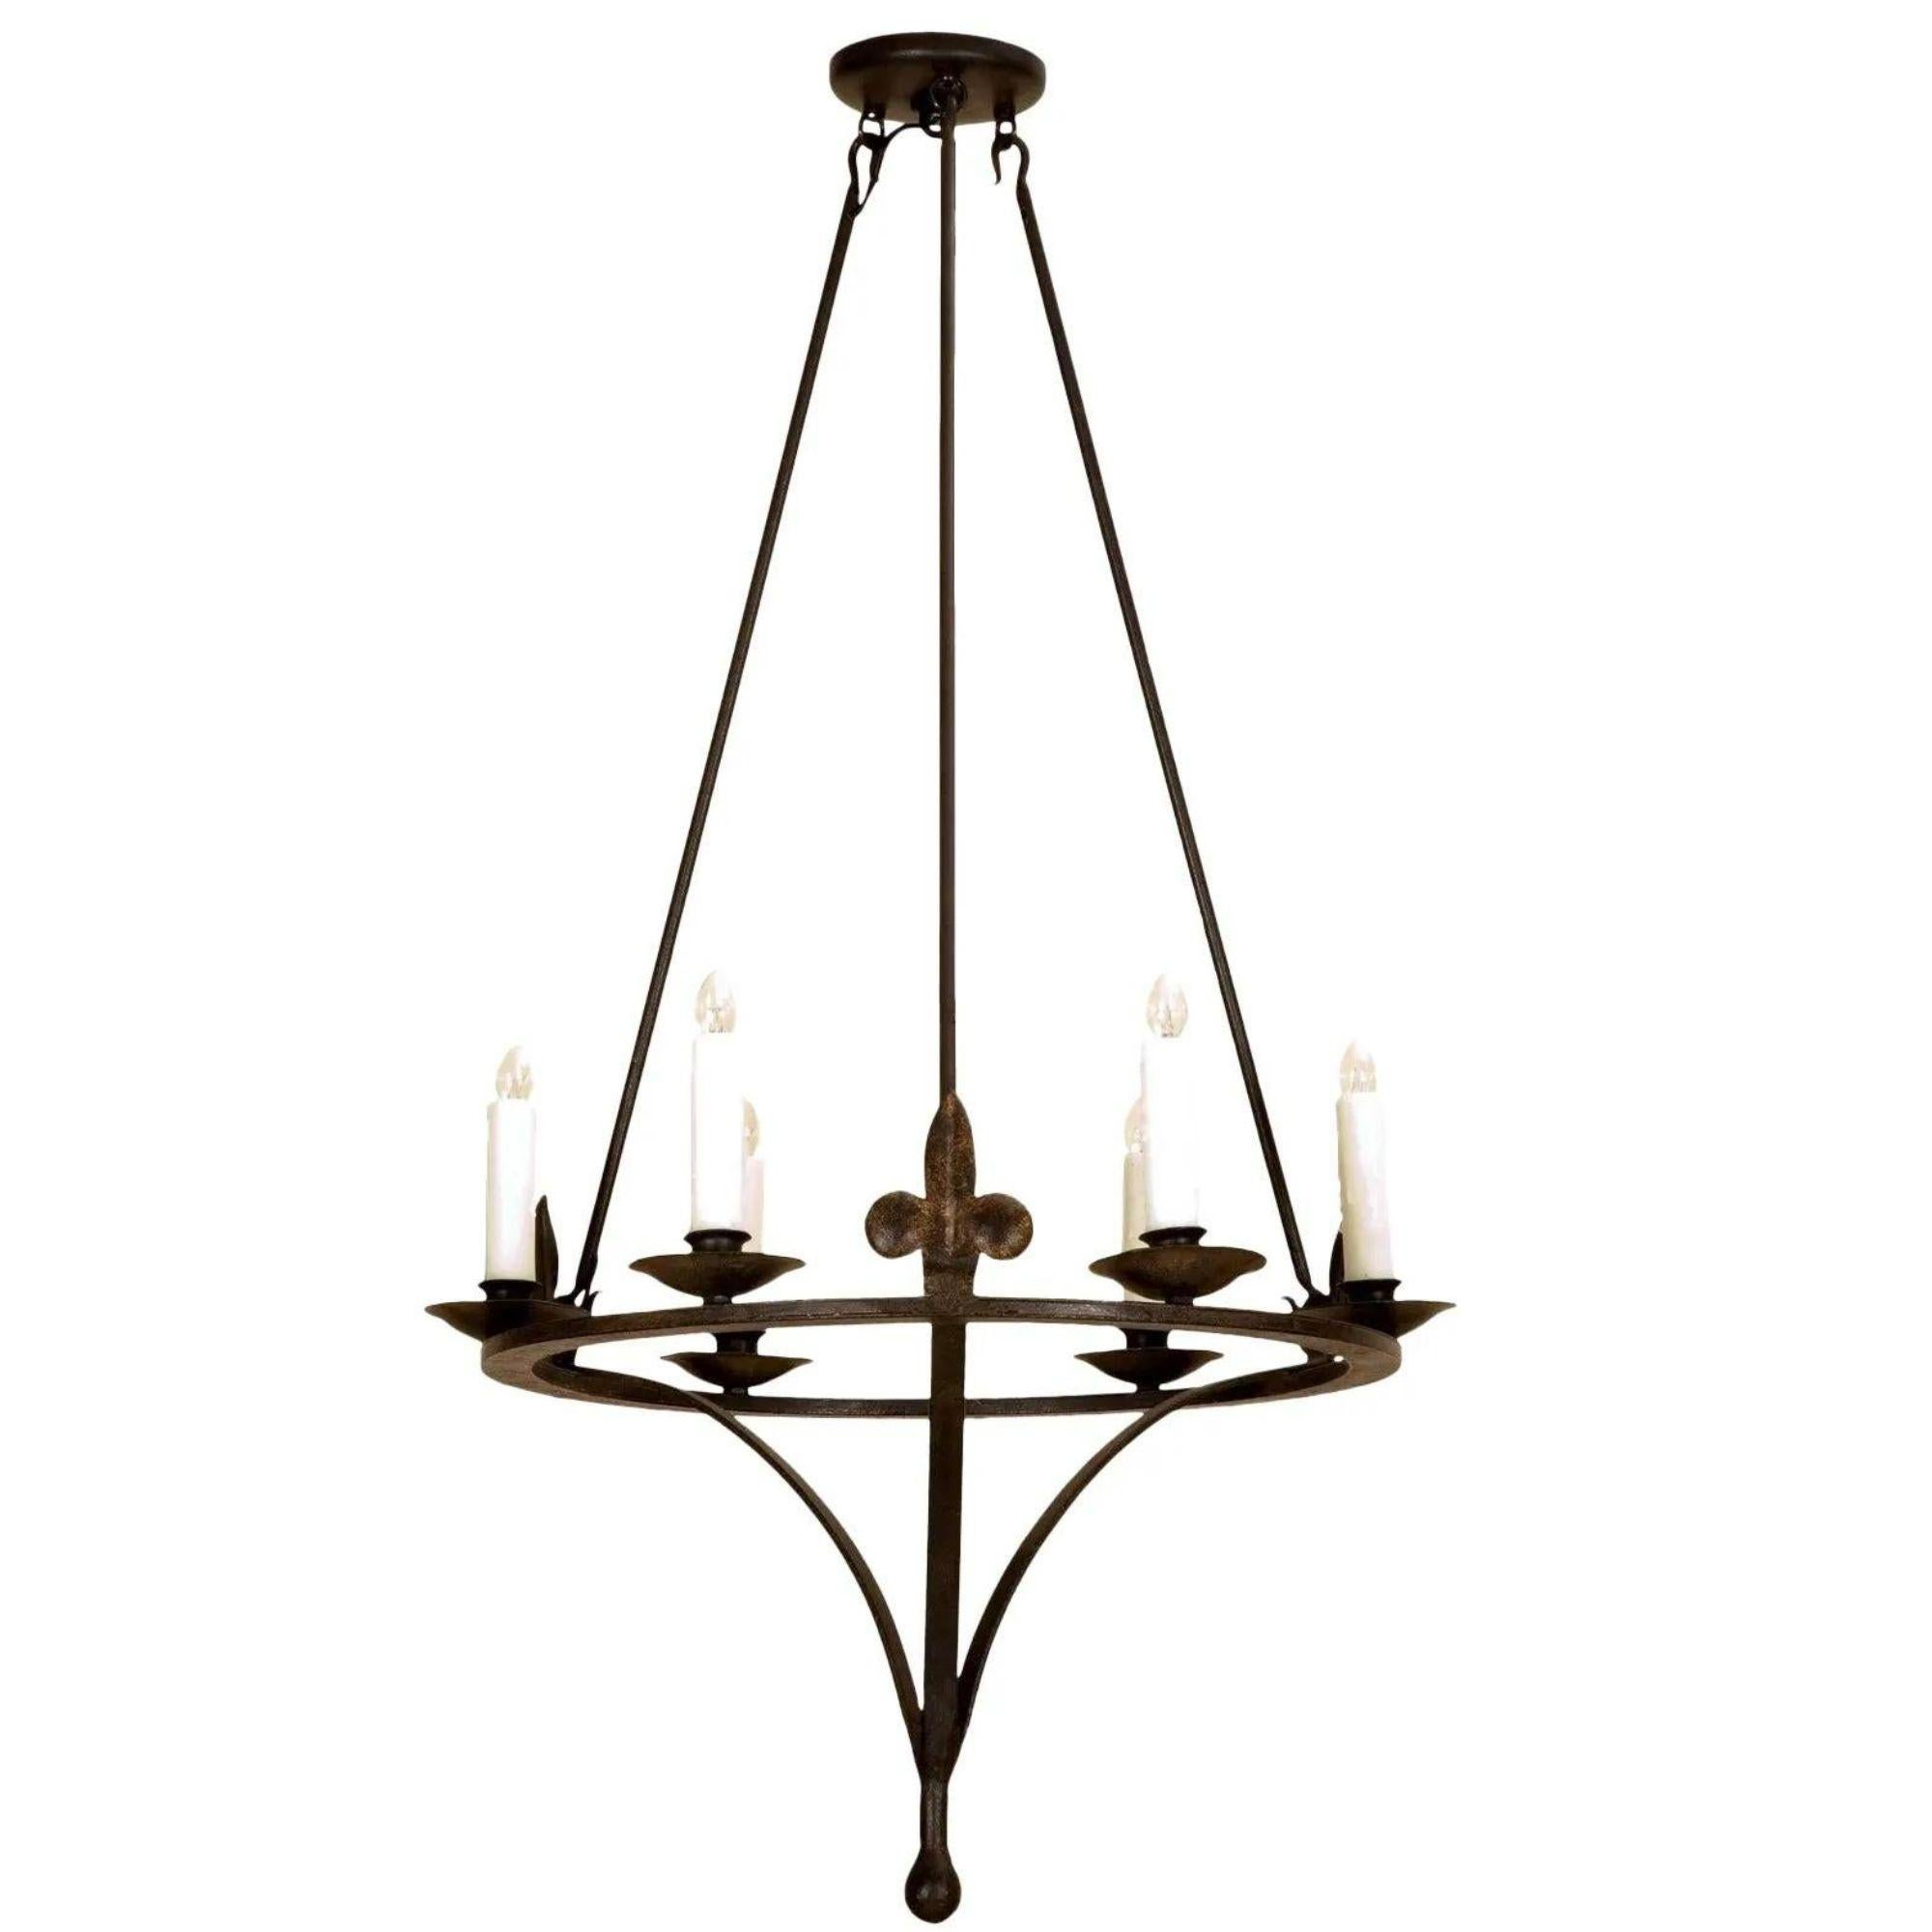 Spanish Colonial Wrought Iron Six Light Chandelier by Randy Esada

Additional information: 
Materials: Lights, Wrought Iron
Color: Black
Brand: Randy Esada Designs for Prospr
Designer: Randy Esada Designs for Prospr
Period: 2010s
Styles: French